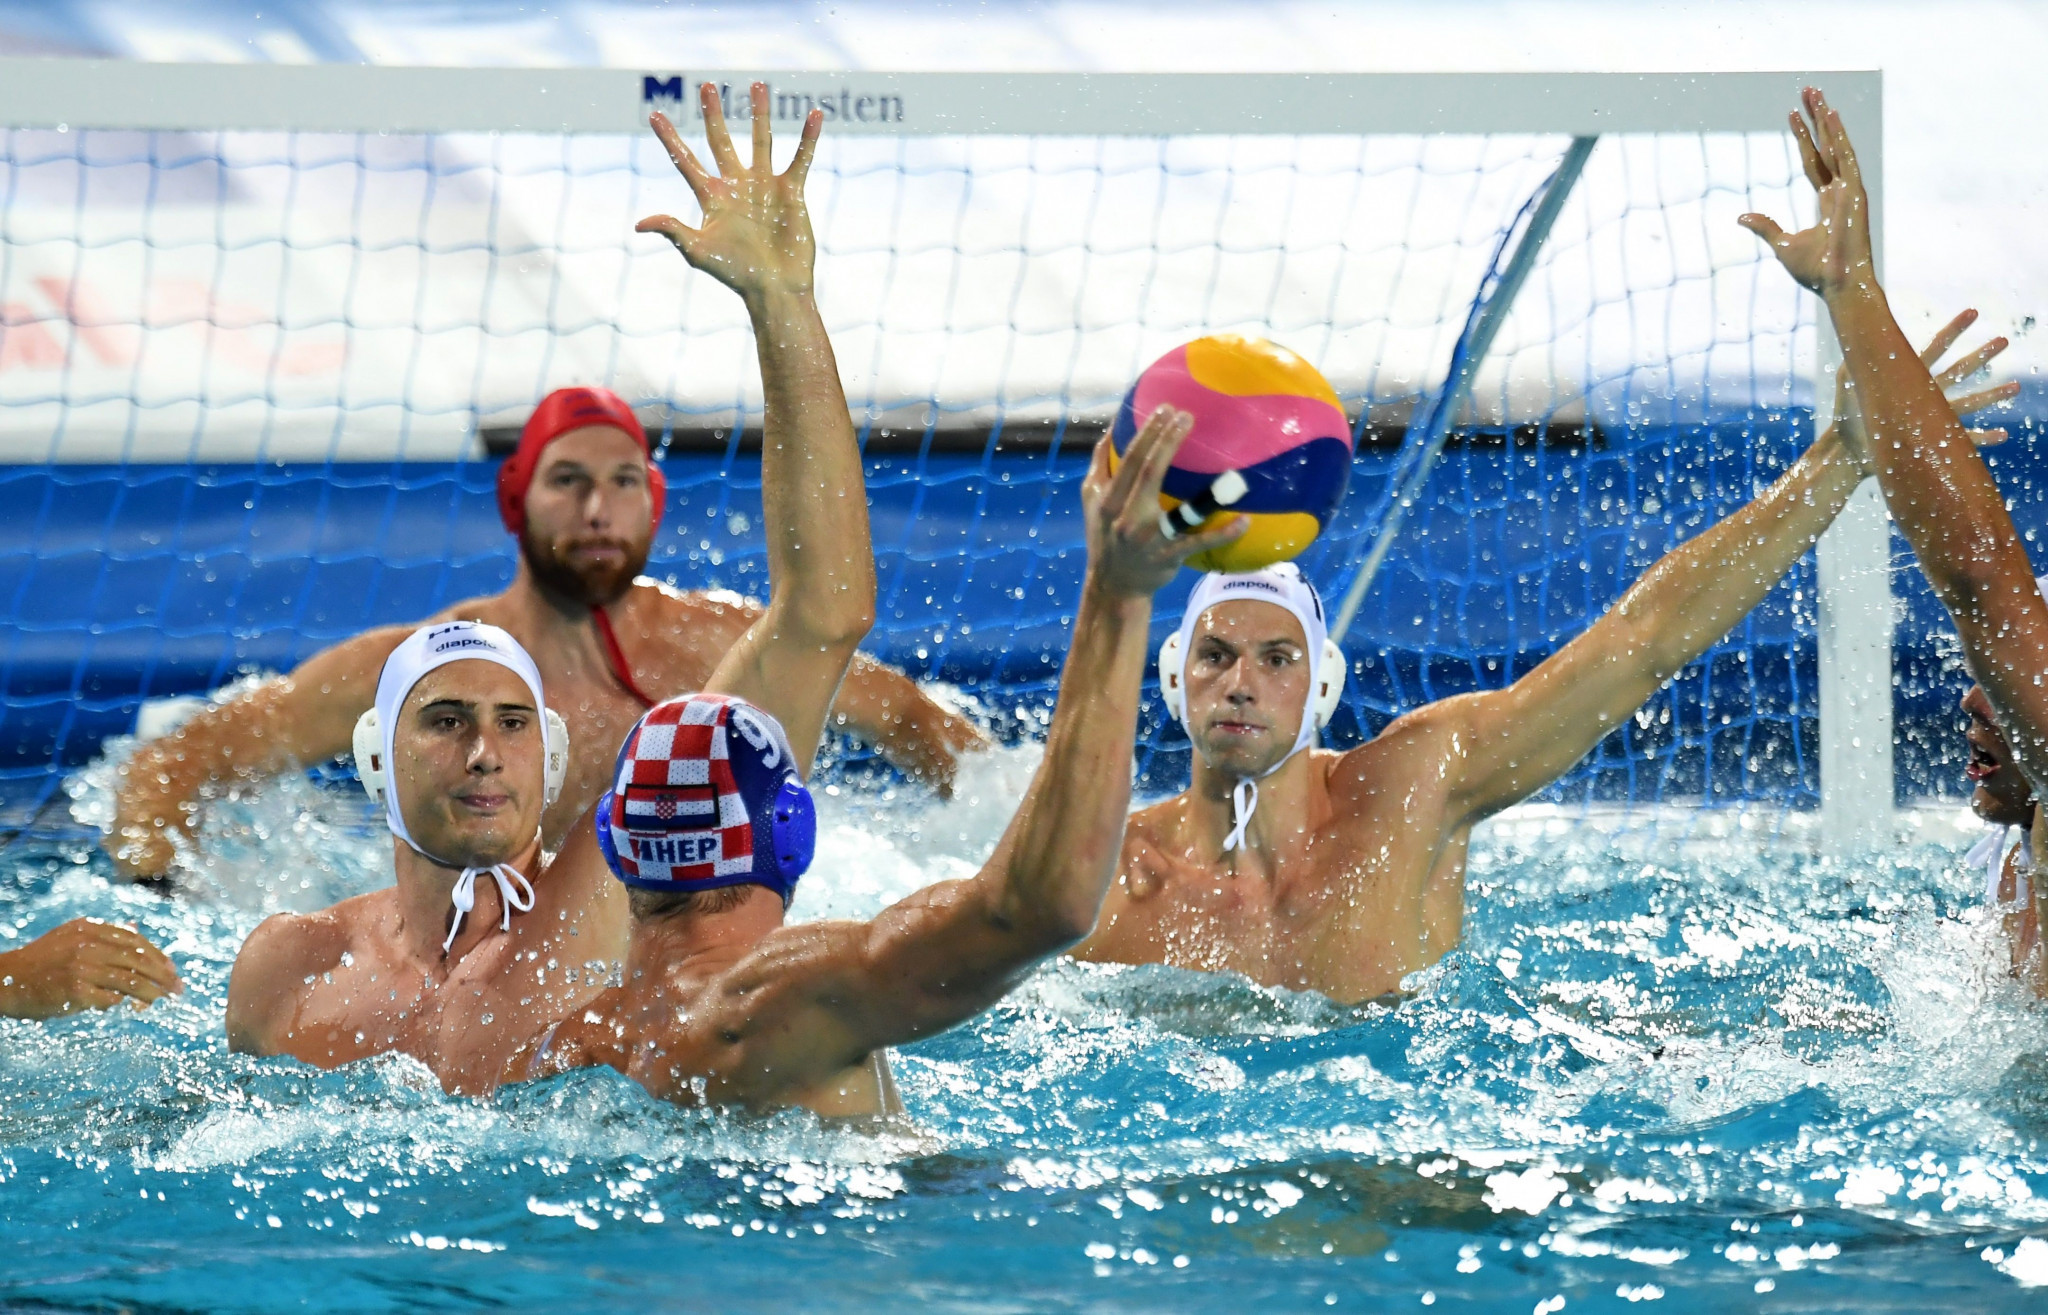 Water polo community to discuss future of sport at FINA World Conference